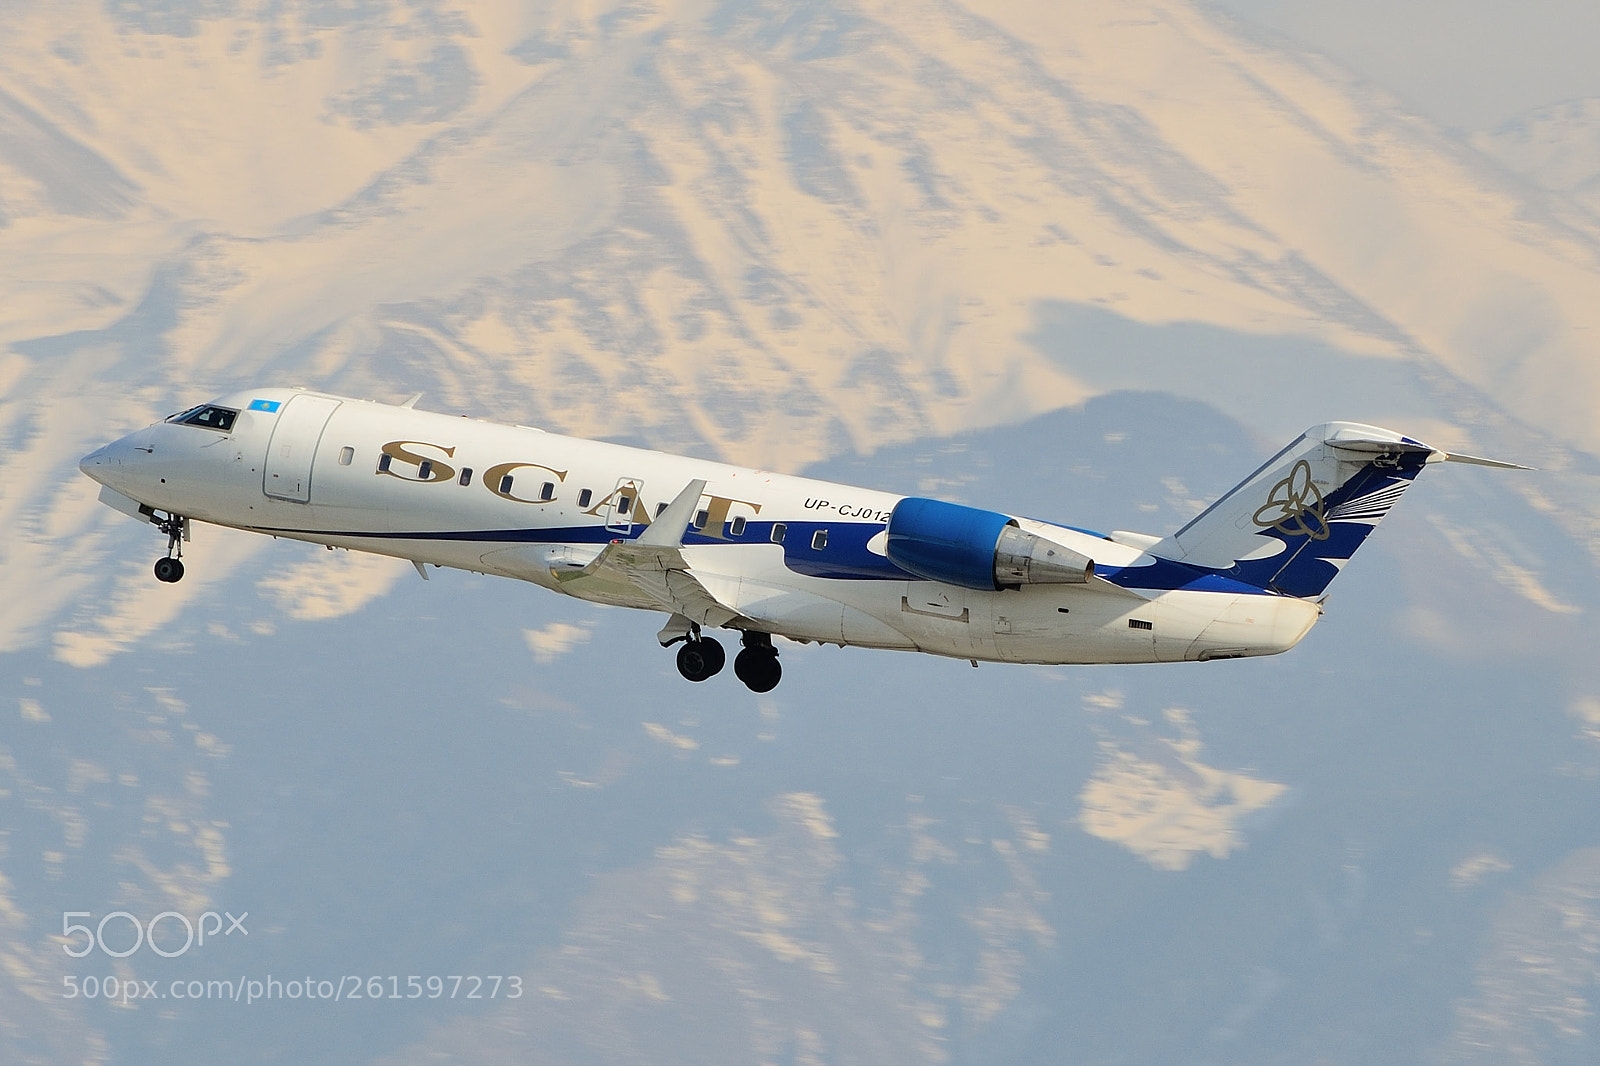 Nikon AF-S Nikkor 70-300mm F4.5-5.6G VR sample photo. Photo collection of aircraft photography